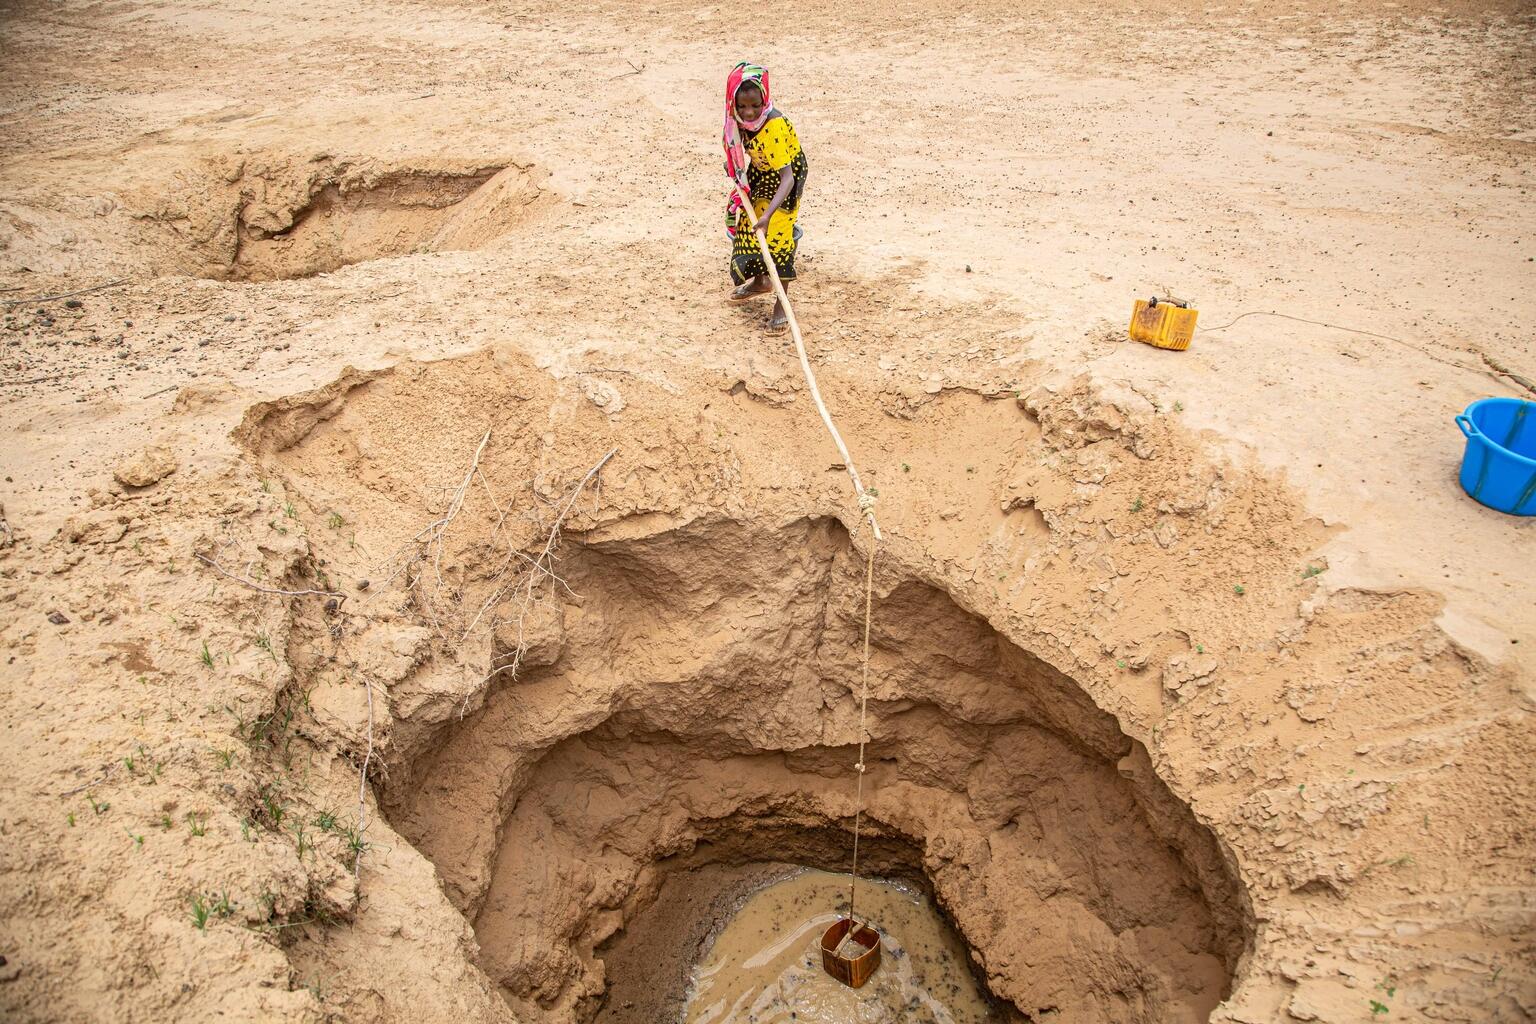 Because of the lack of water in her village, Hawa, a 10 year old girl, and her friends have to fetch water from huge wells dug in the ground. In the heat of the day, she carries 10 to 30 liter basins on their heads to irrigate the market garden. The operation is repeated up to 10 times a day.